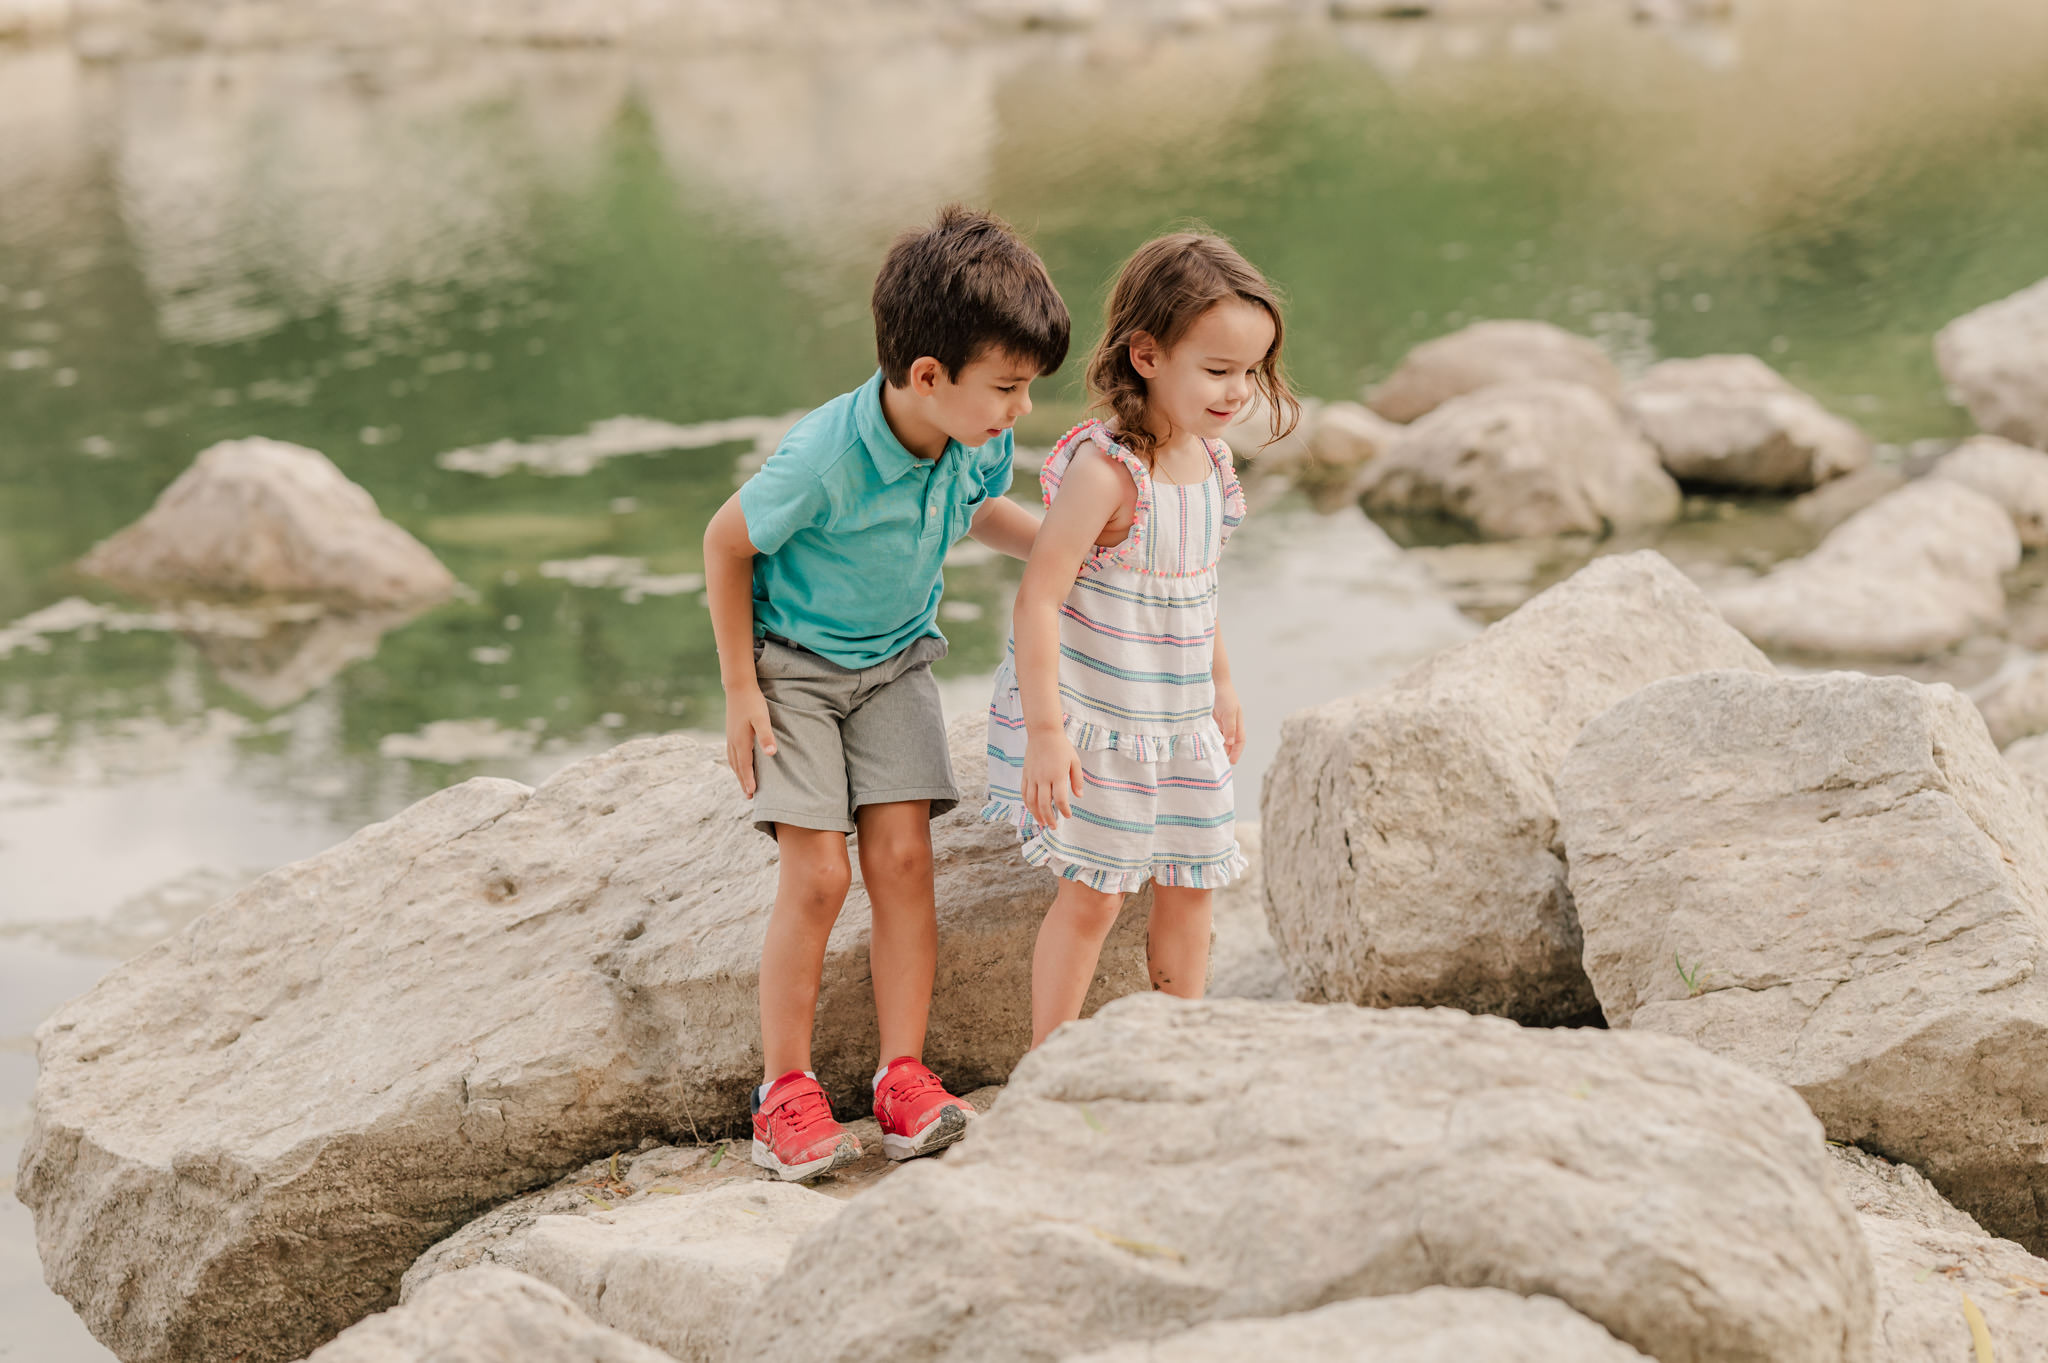 Boy and girl climb on rocks by the water. He's protectively holding her arm. 